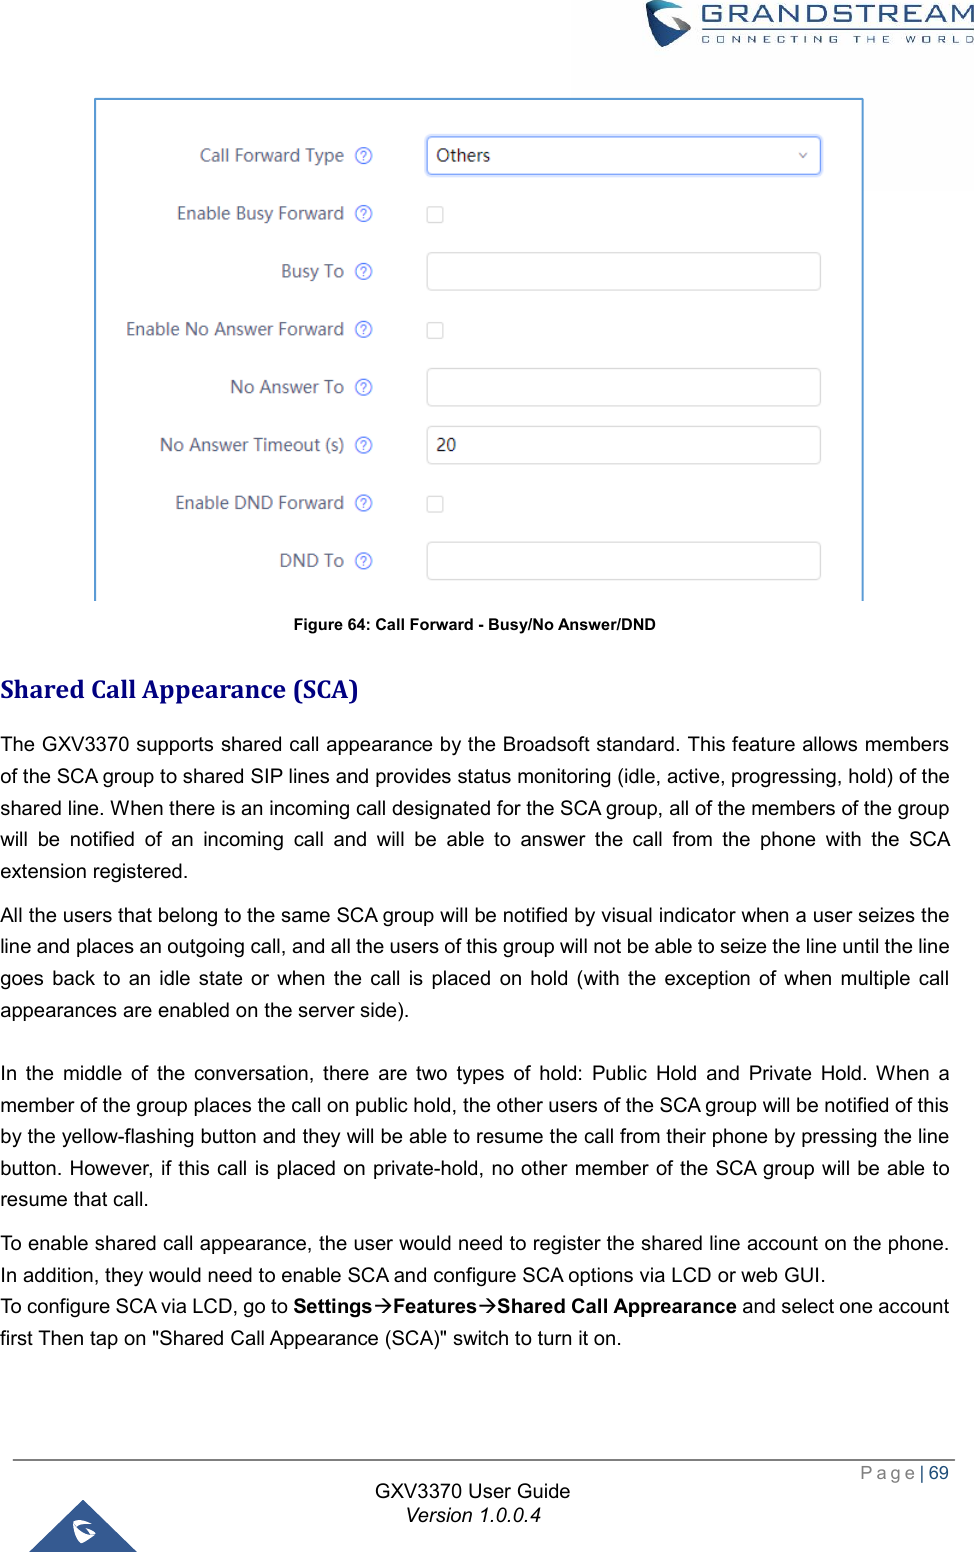  Page| 69  GXV3370 User Guide Version 1.0.0.4   Figure 64: Call Forward - Busy/No Answer/DND Shared Call Appearance (SCA) The GXV3370 supports shared call appearance by the Broadsoft standard. This feature allows members of the SCA group to shared SIP lines and provides status monitoring (idle, active, progressing, hold) of the shared line. When there is an incoming call designated for the SCA group, all of the members of the group will be notified of an incoming call and will be able to answer the call from the phone with the SCA extension registered.  All the users that belong to the same SCA group will be notified by visual indicator when a user seizes the line and places an outgoing call, and all the users of this group will not be able to seize the line until the line goes back to an idle state or when the call is placed on hold (with the exception of when multiple call appearances are enabled on the server side).  In the middle of the conversation, there are two types of hold: Public Hold and Private Hold. When a member of the group places the call on public hold, the other users of the SCA group will be notified of this by the yellow-flashing button and they will be able to resume the call from their phone by pressing the line button. However, if this call is placed on private-hold, no other member of the SCA group will be able to resume that call.  To enable shared call appearance, the user would need to register the shared line account on the phone. In addition, they would need to enable SCA and configure SCA options via LCD or web GUI.  To configure SCA via LCD, go to SettingsàFeaturesàShared Call Apprearance and select one account first Then tap on &quot;Shared Call Appearance (SCA)&quot; switch to turn it on.  